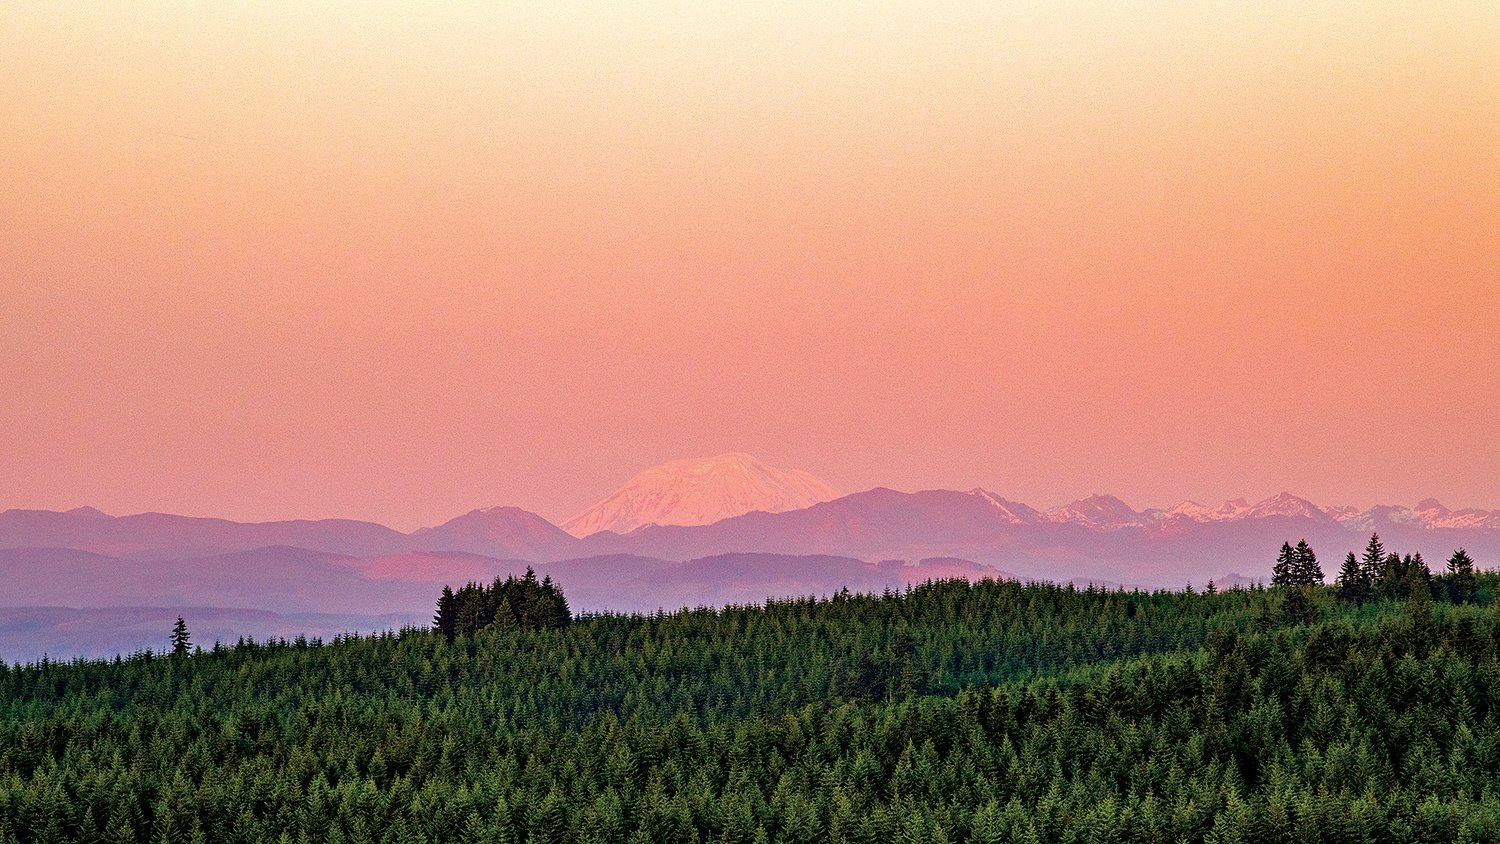 Mount Adams is cast in a hazy pink during the sunset, pictured from Crego Hill in Adna on Tuesday evening.